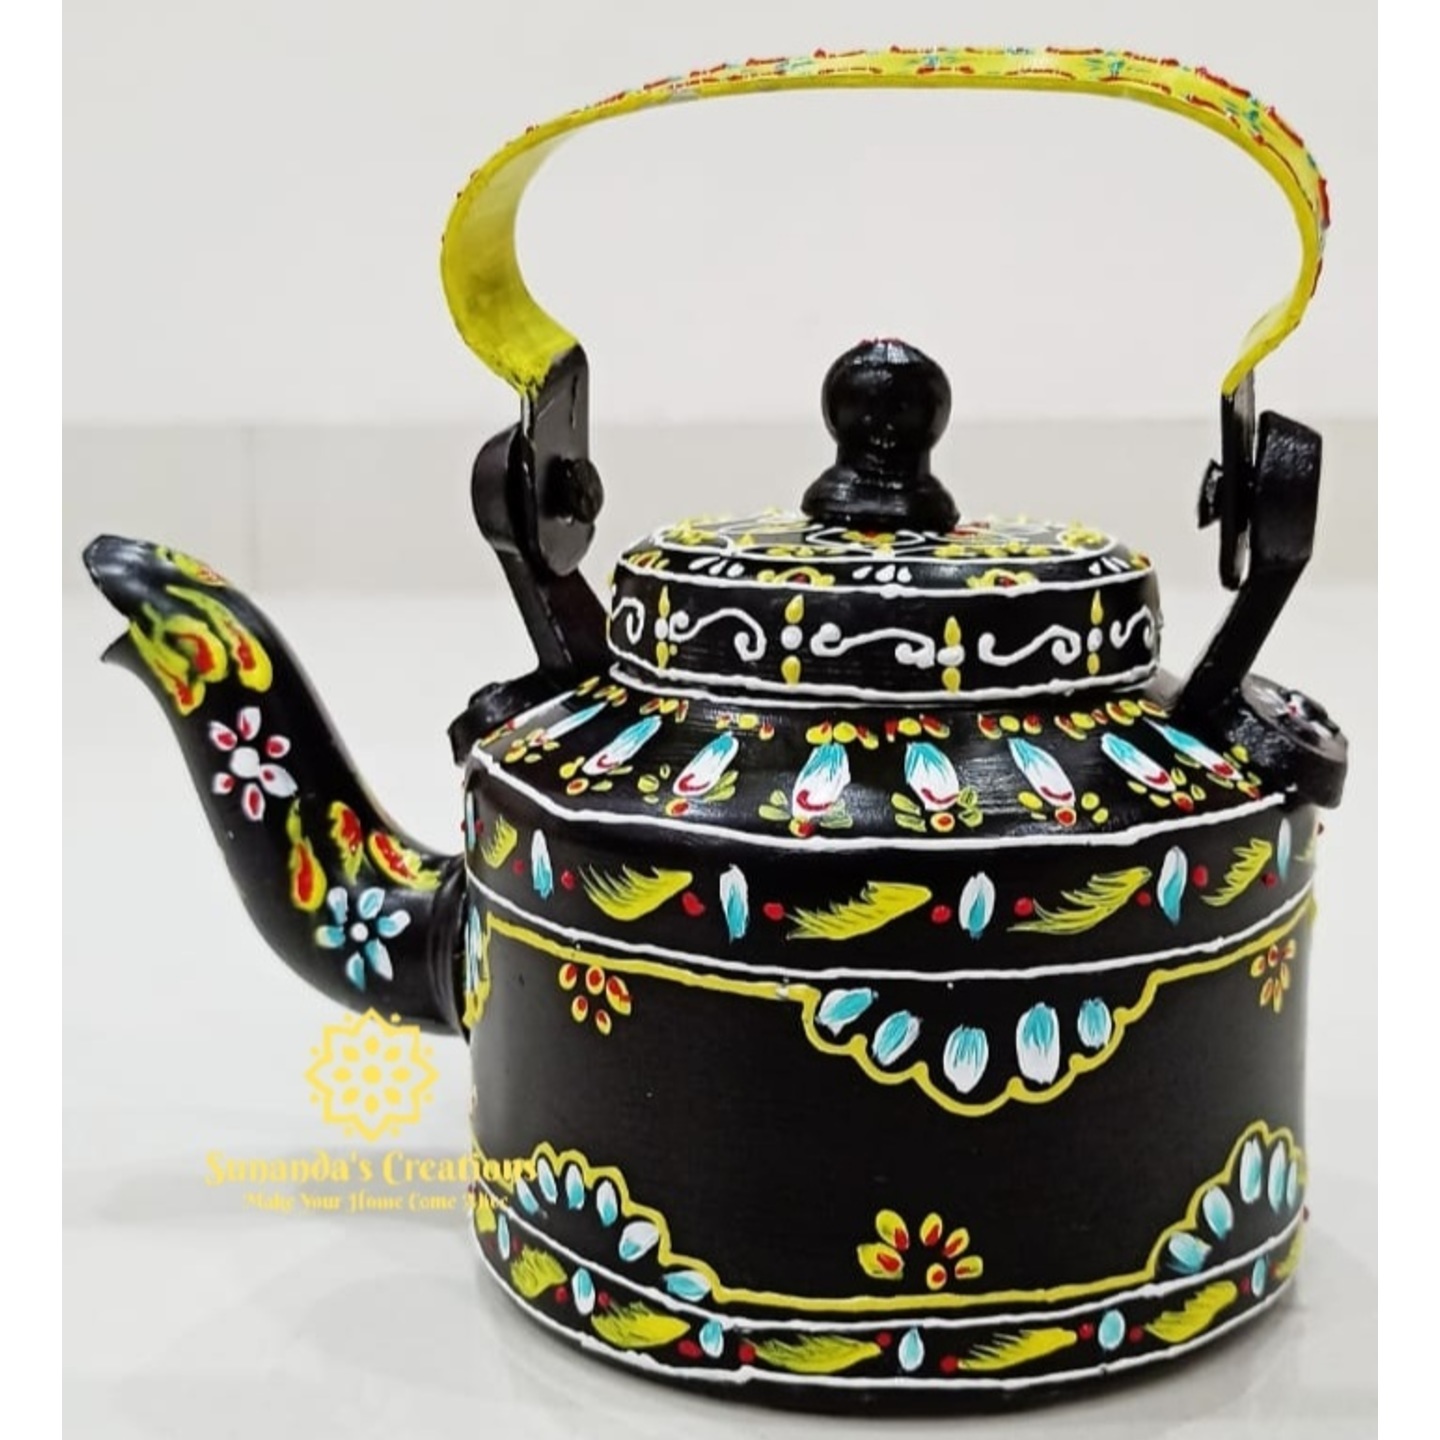 Traditional ArtHand PaintedKettle Black